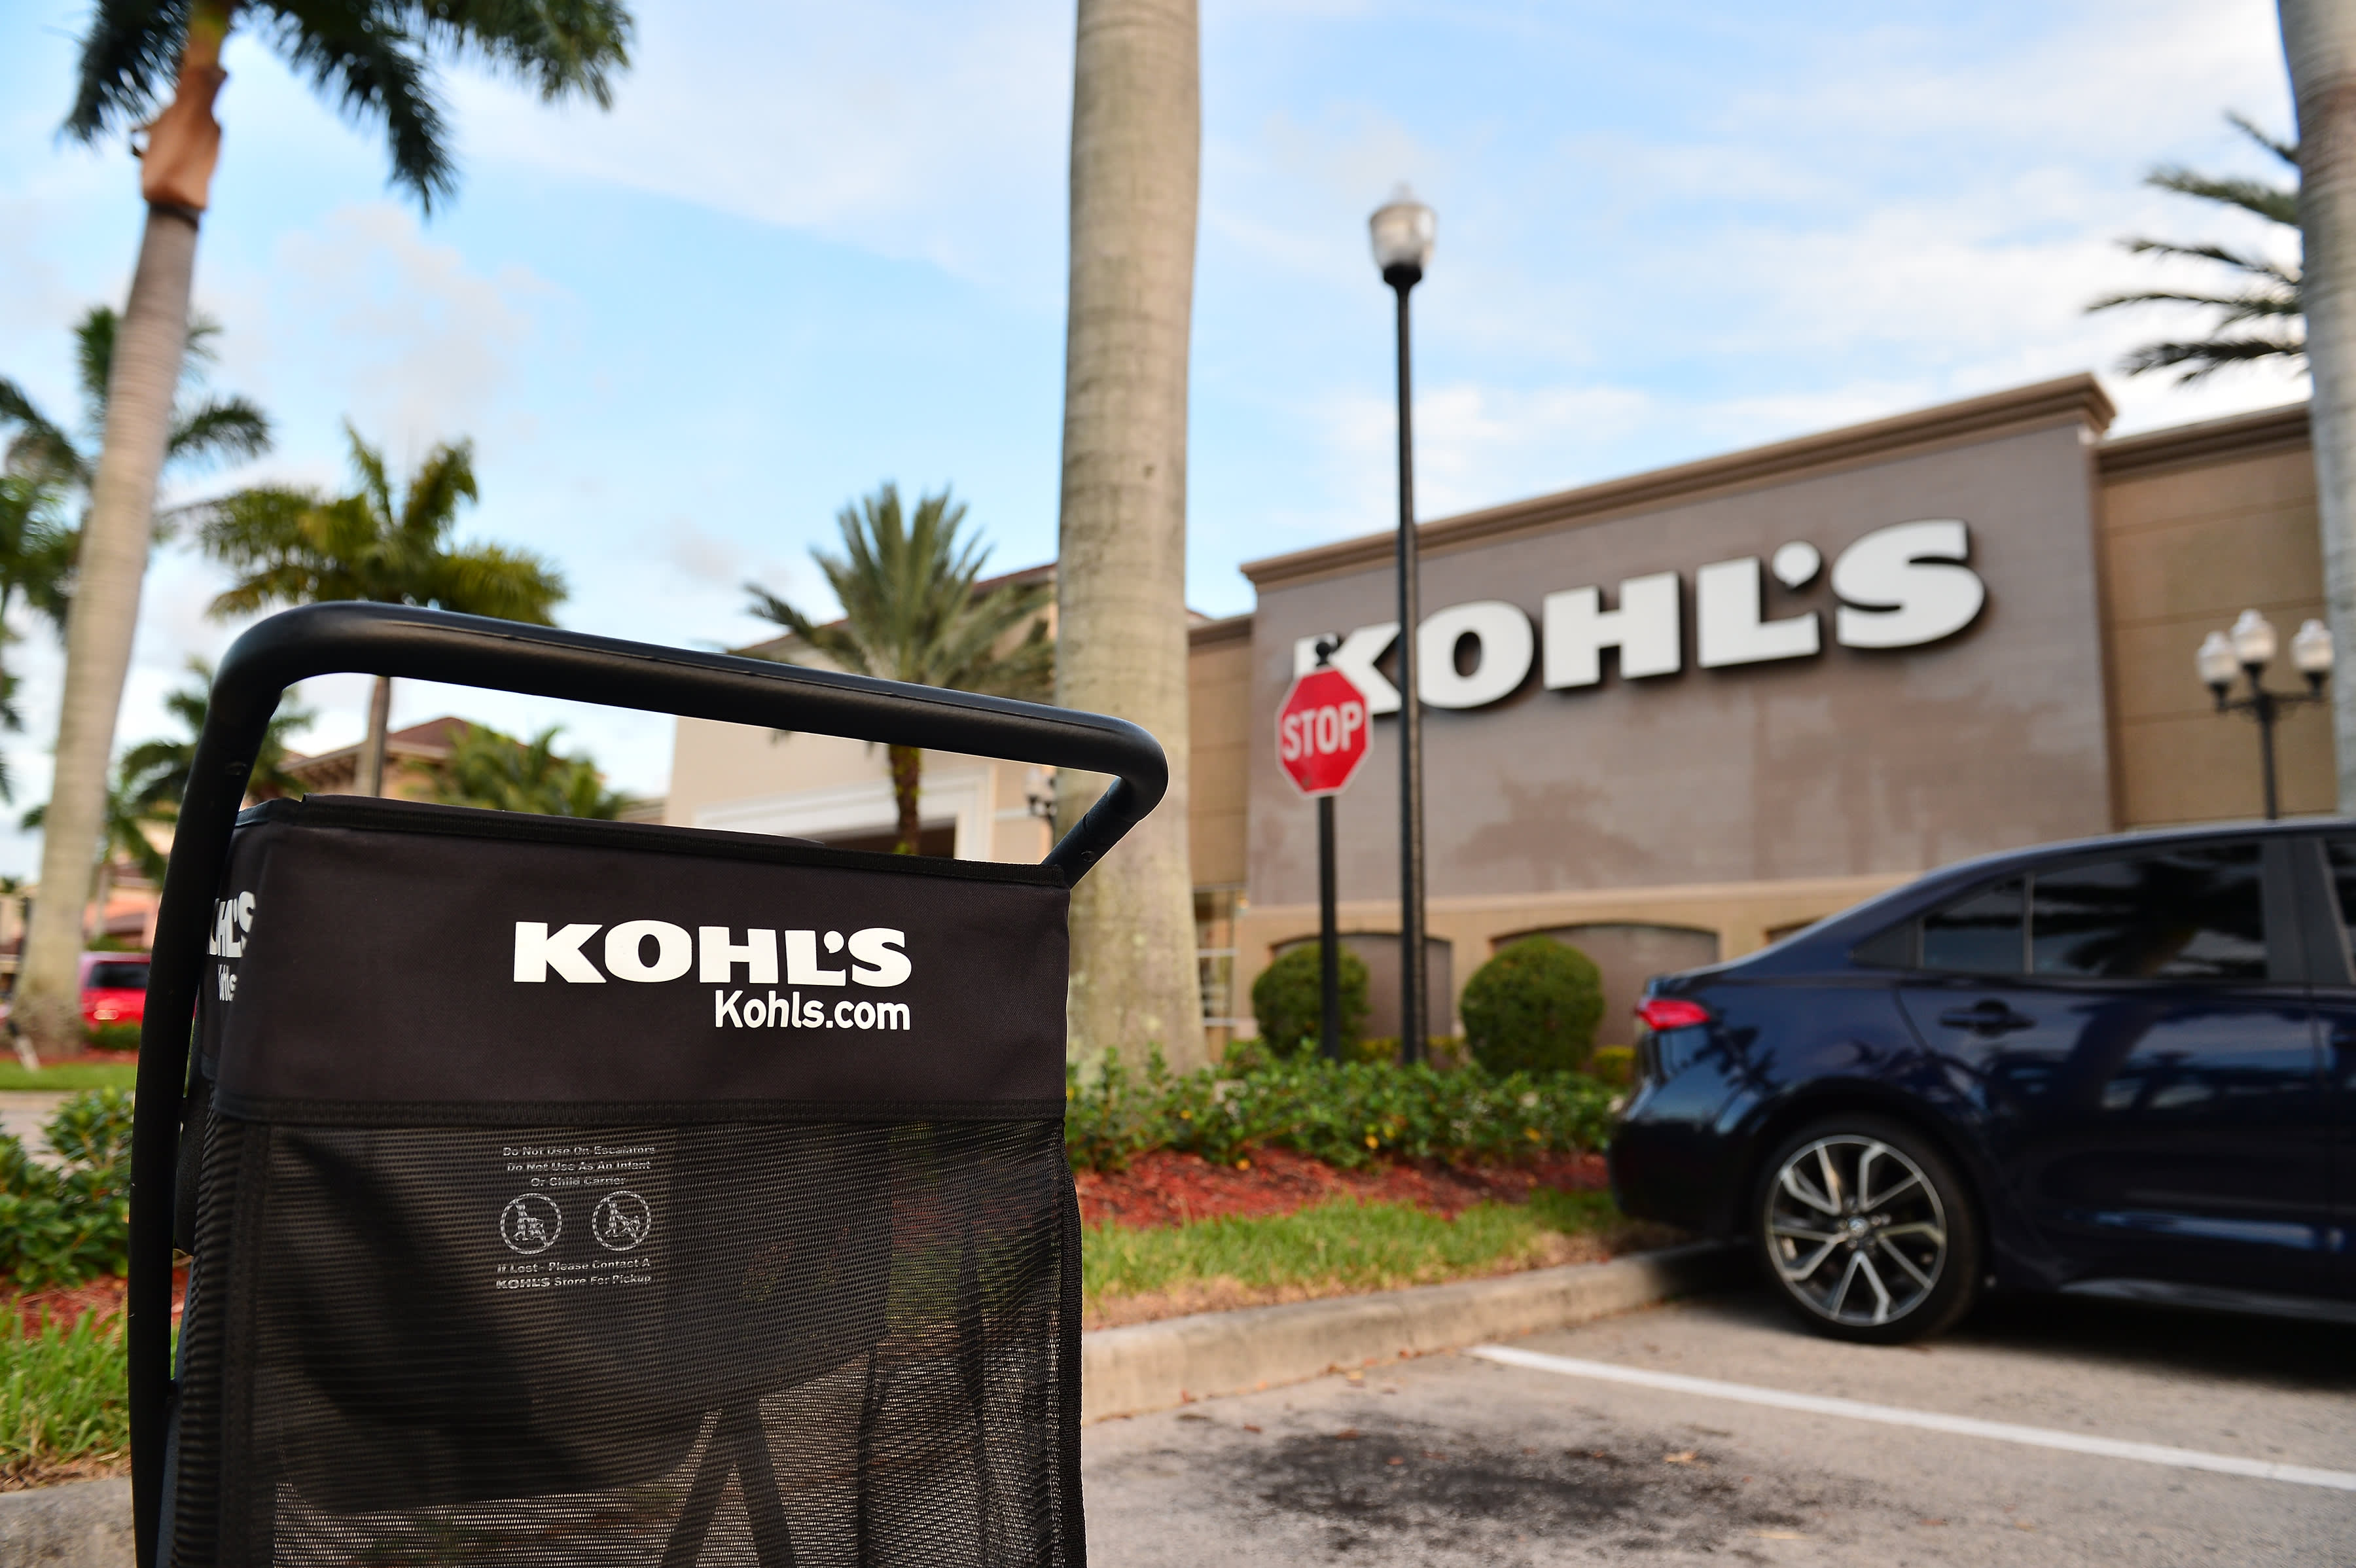 Kohl’s says it has no plans to sell more properties and rent them back